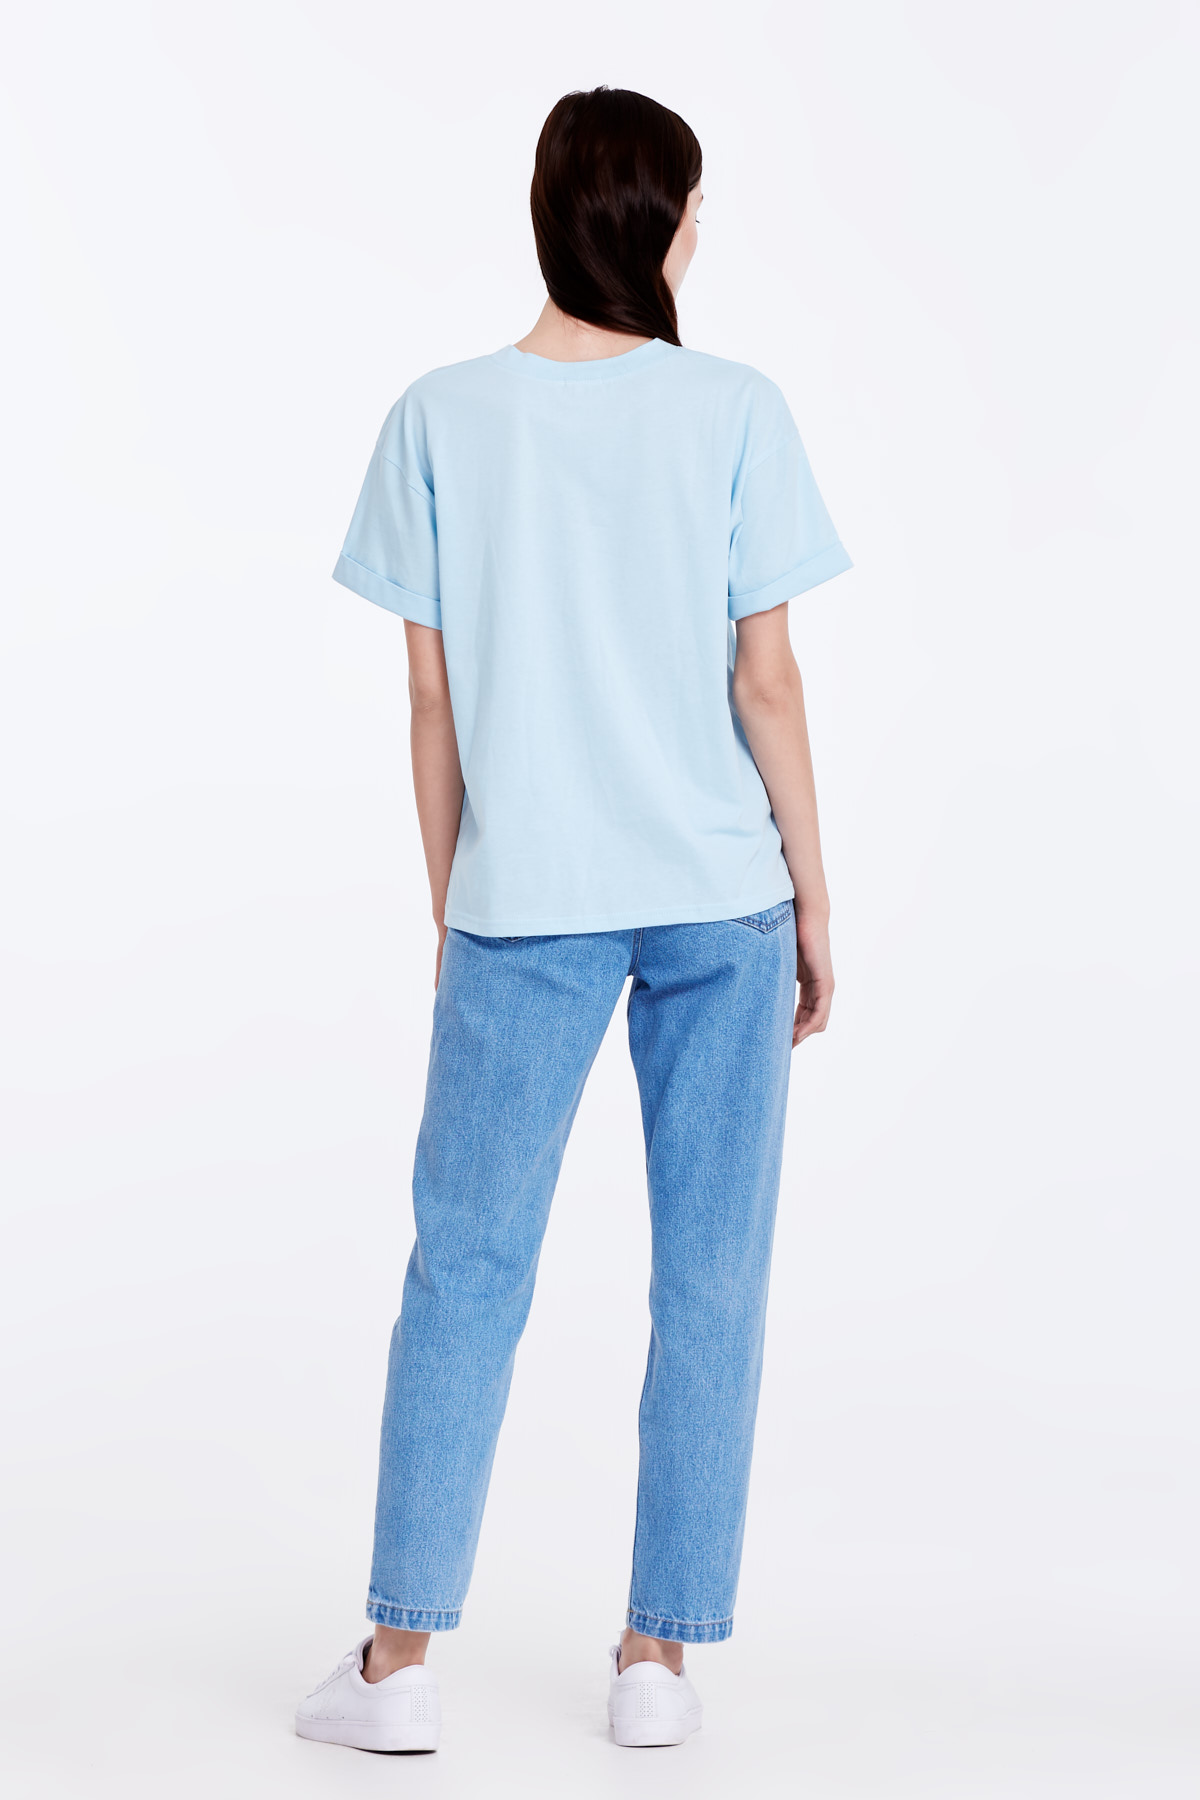 Loose-fitting blue T-shirt with cuffs, photo 6